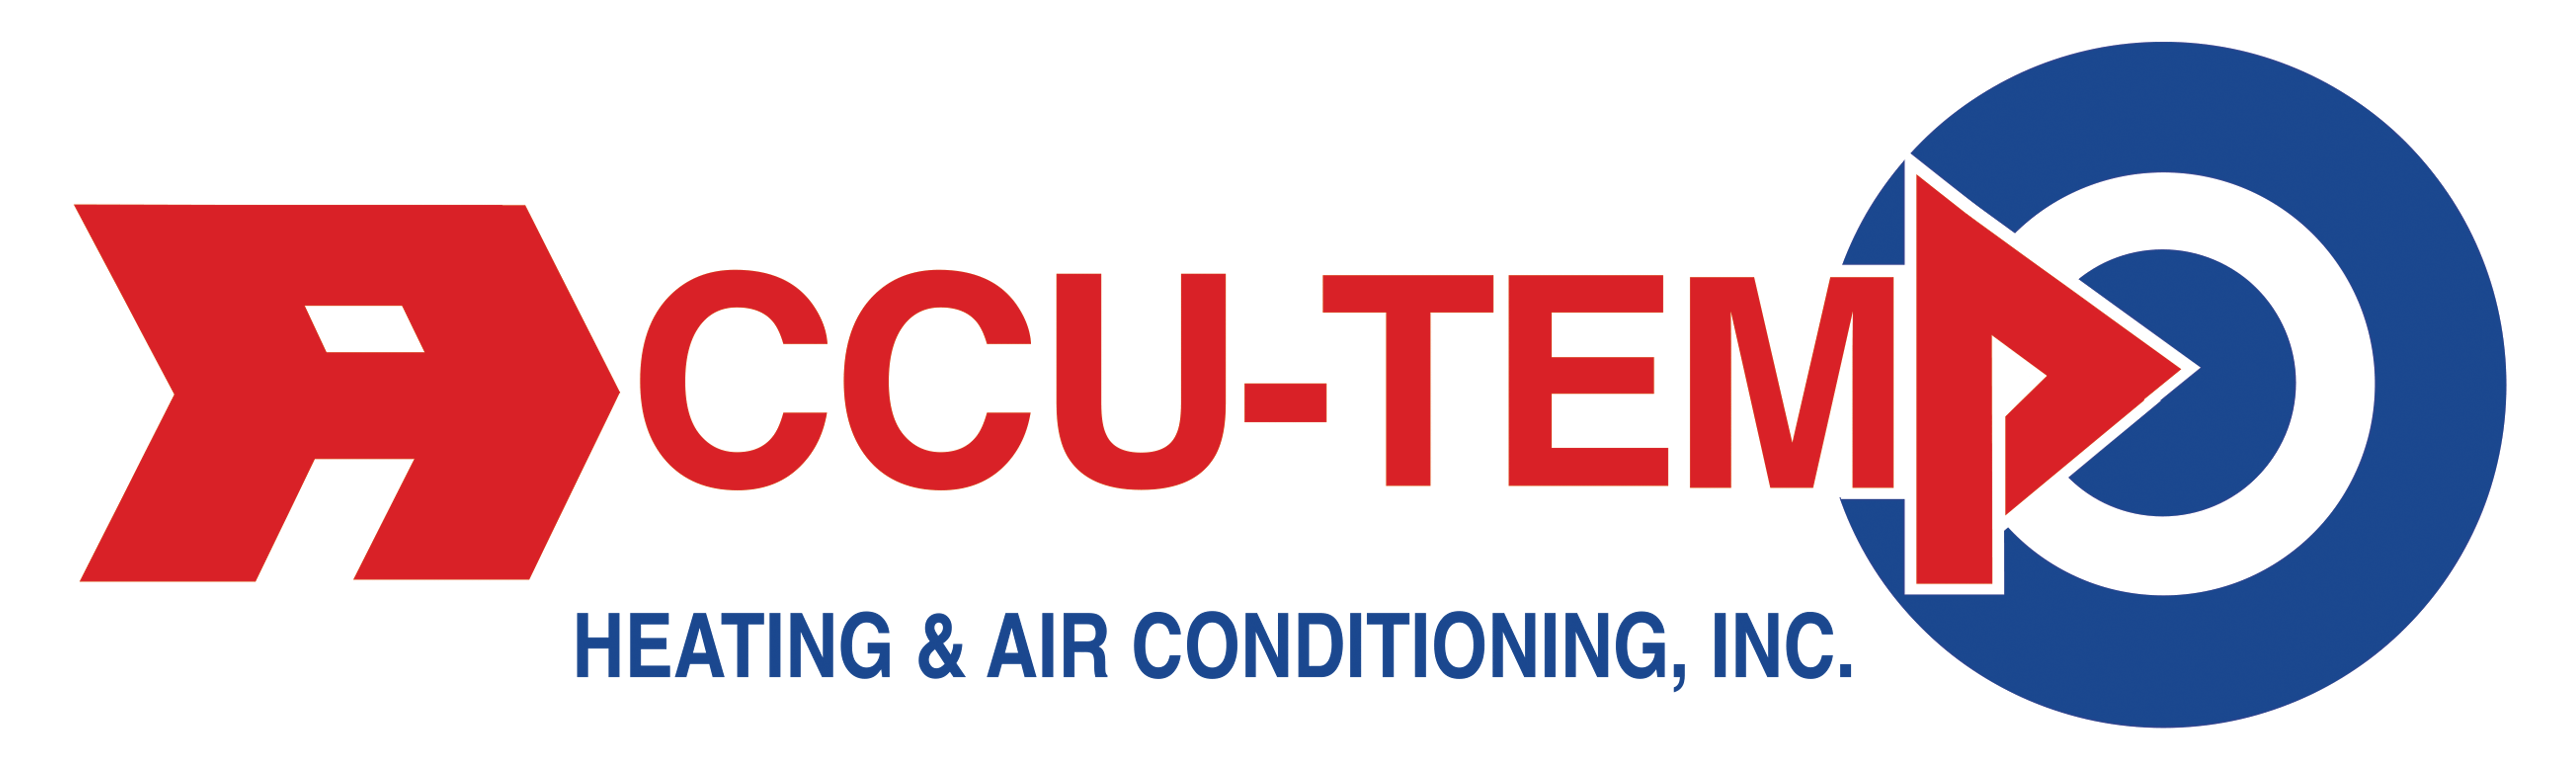 Call Accu-Temp Heating & Air Conditioning for great AC repair service in Howell MI.